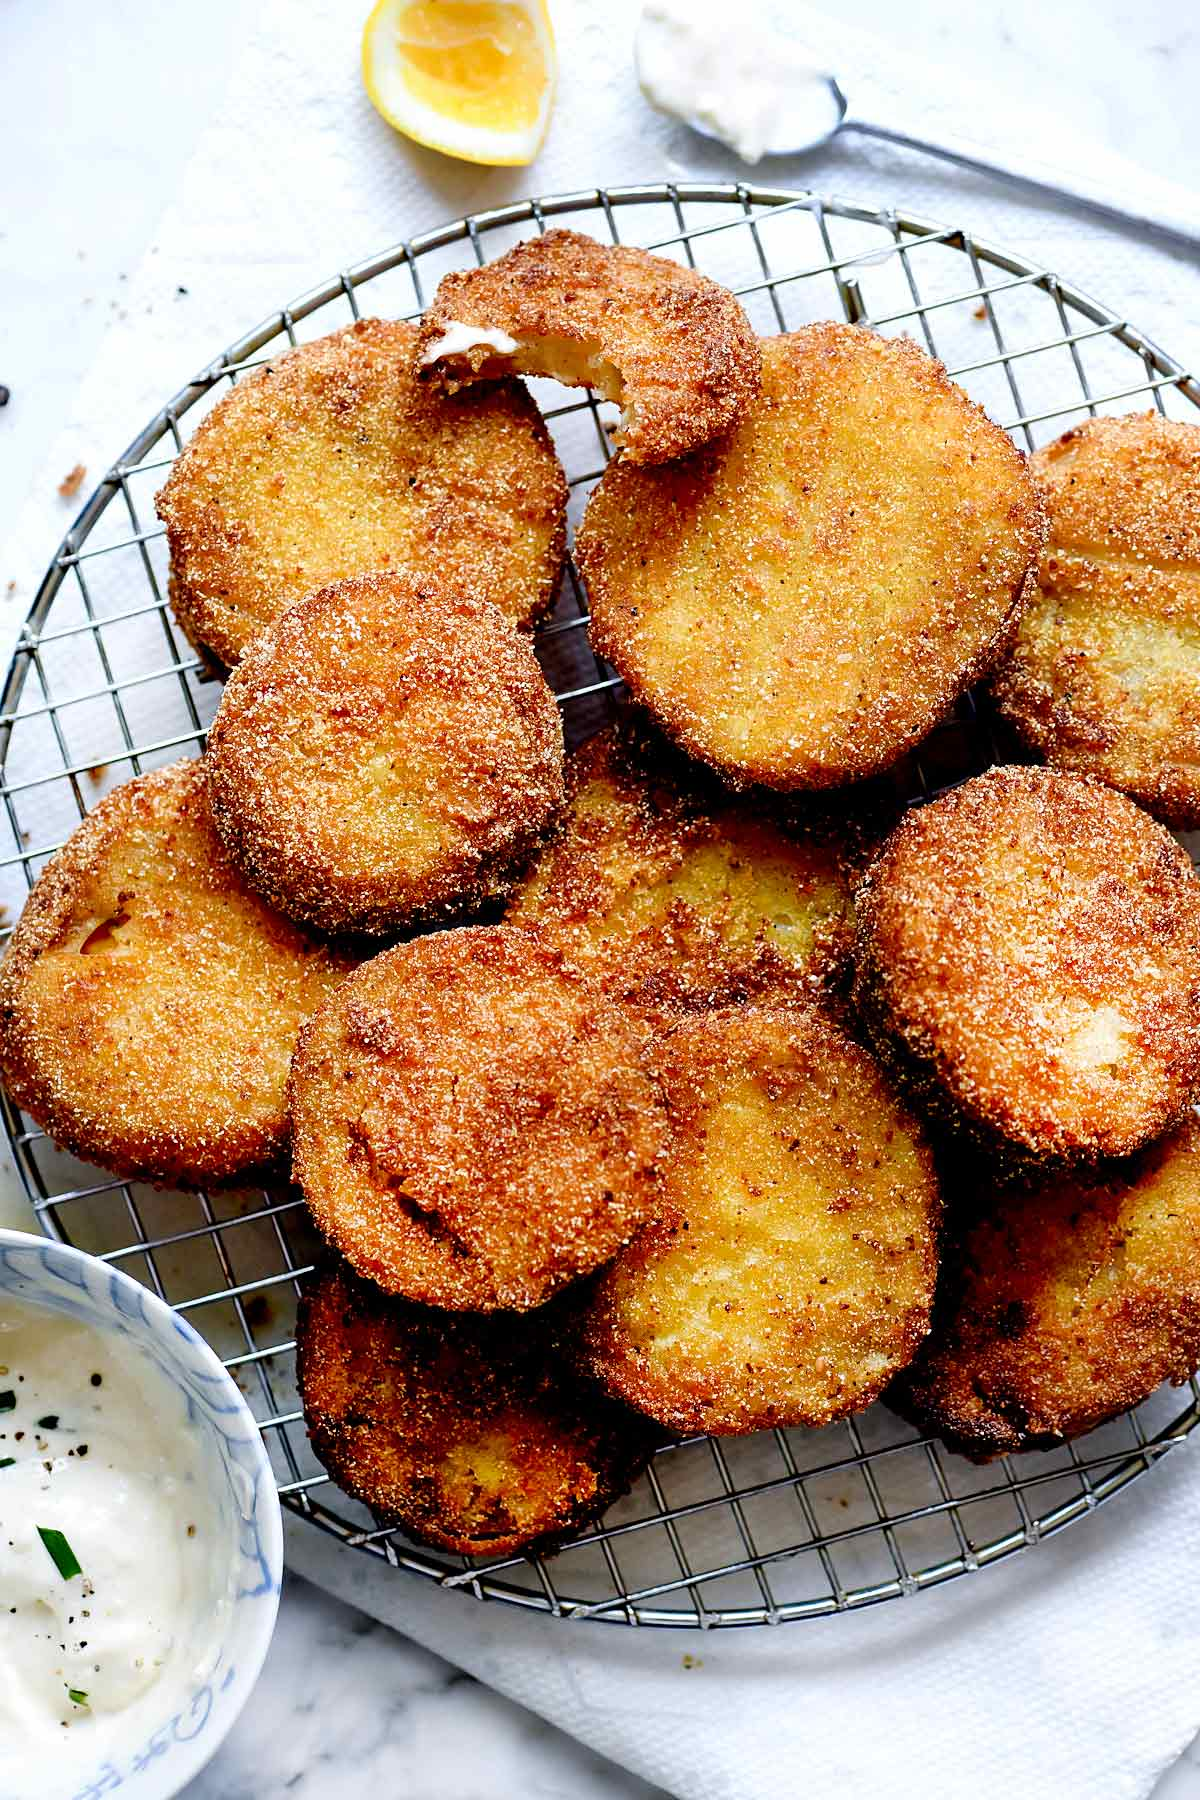 Tomate Verde Frito | foodiecrush.com #fried #fried #green #tomatoes #recipe